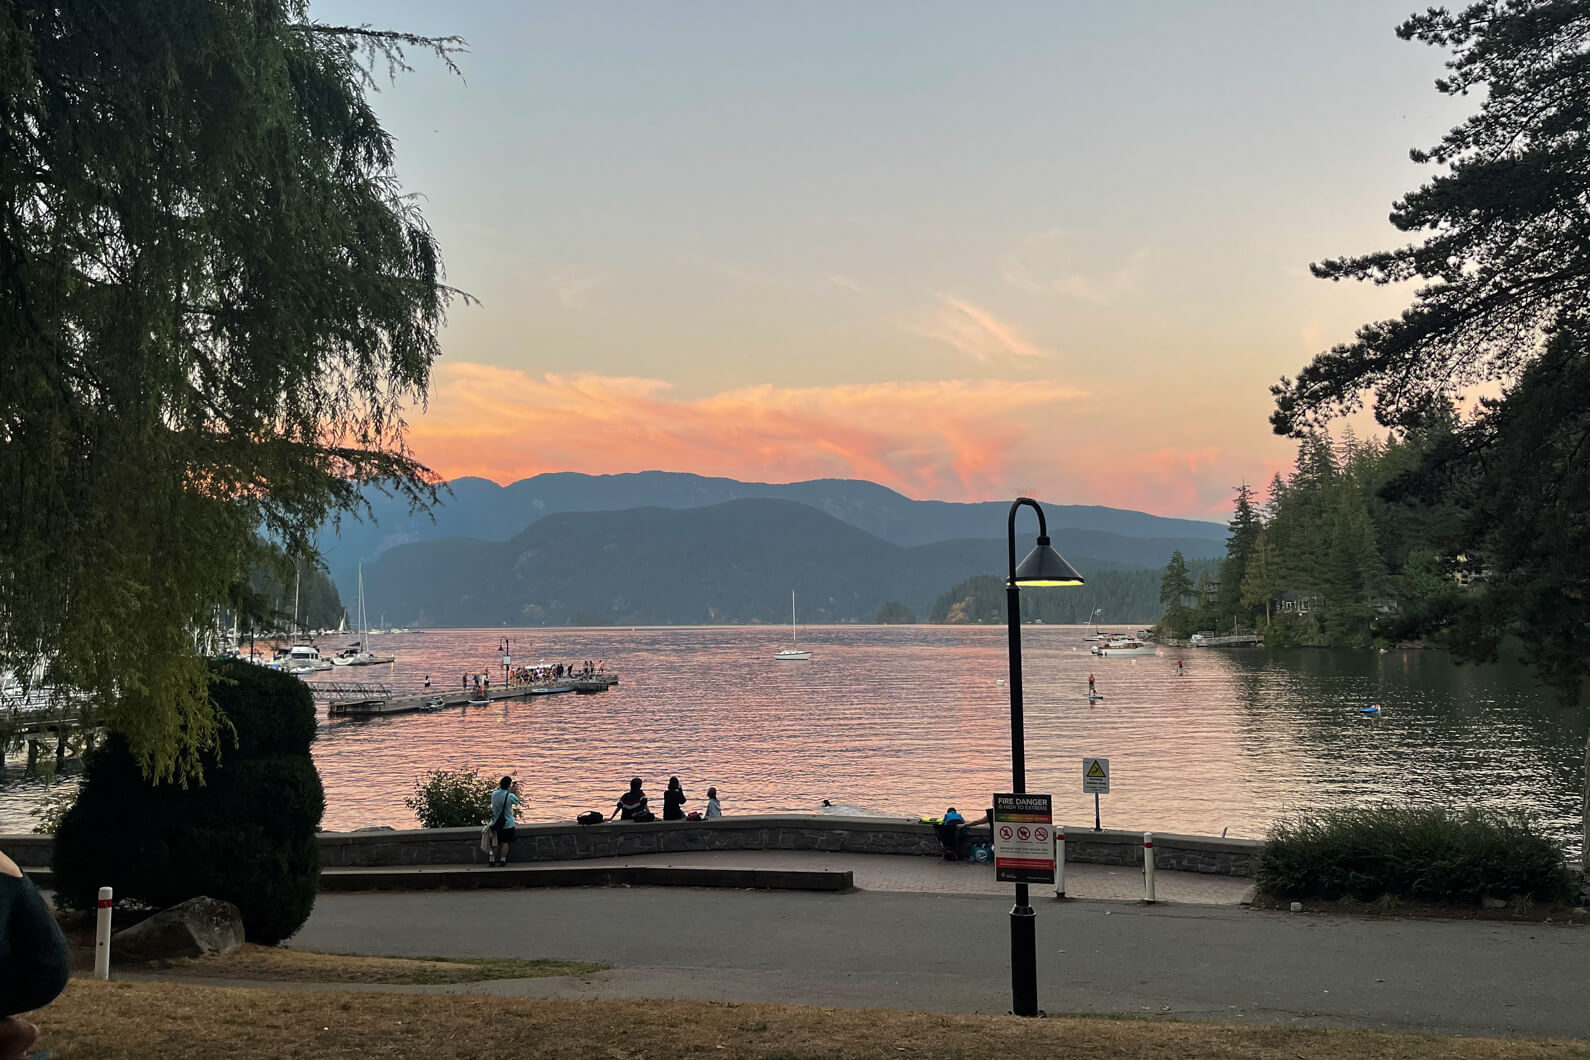 Best Things to do in Vancouver